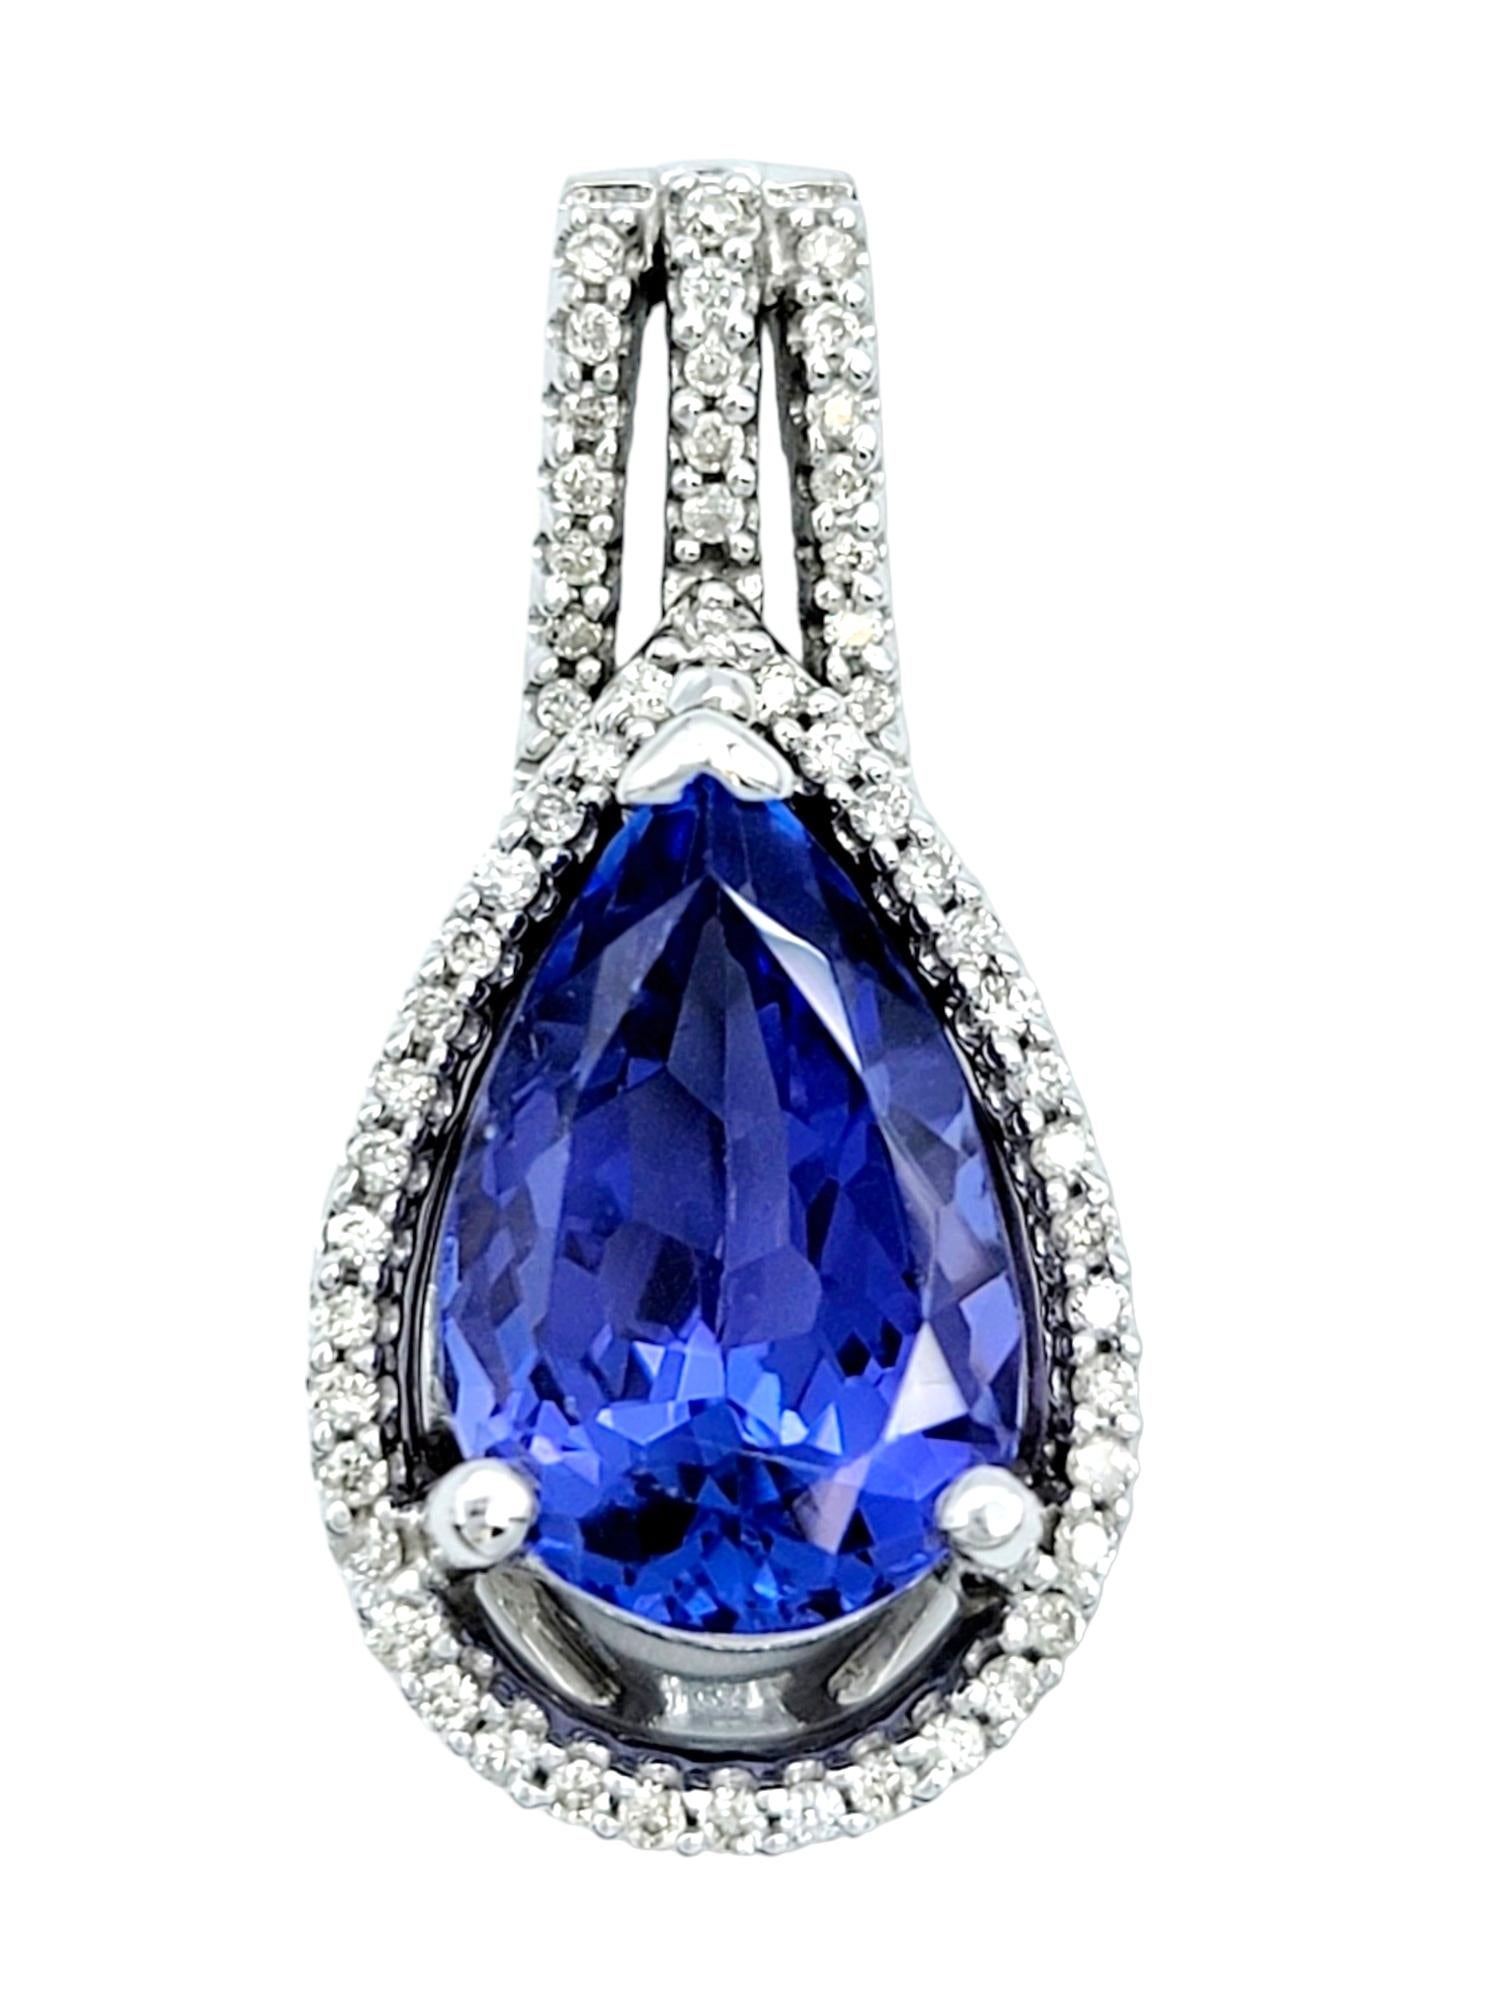 Pear Cut Pear Shaped Blue Tanzanite Pendant with Diamond Halo Set in 14 Karat White Gold For Sale